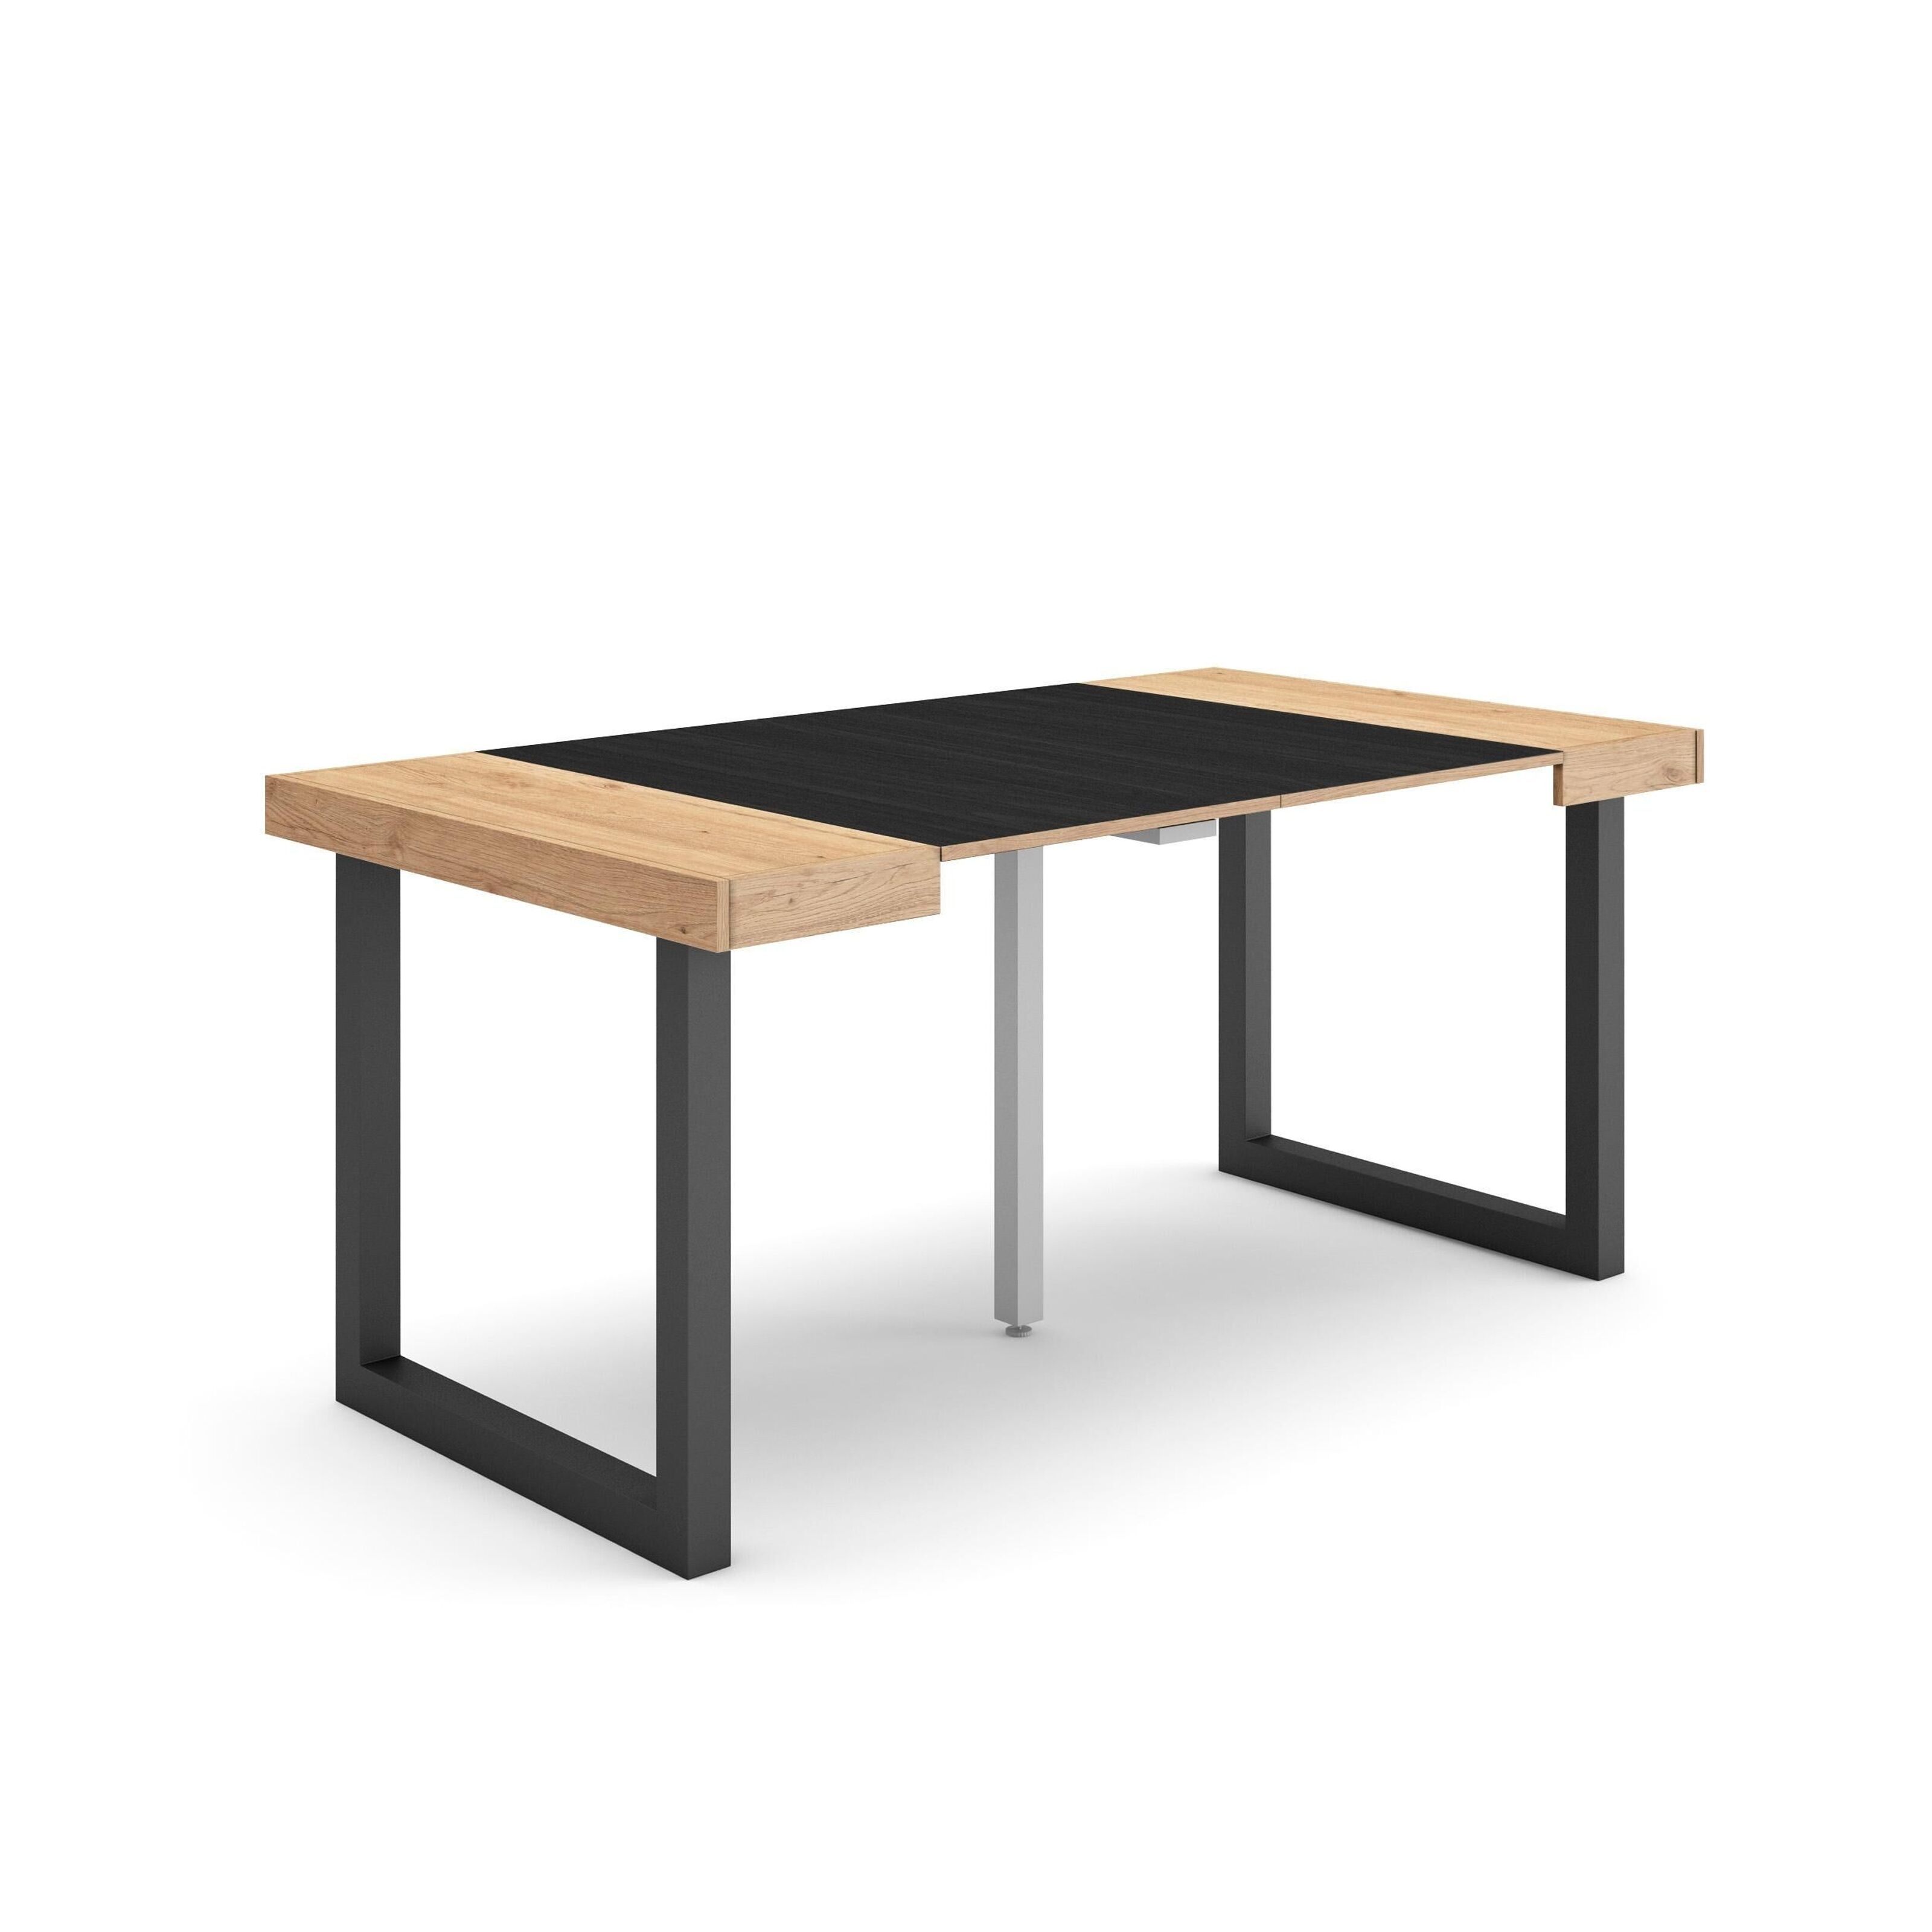 Skraut Home dining table in various finishes